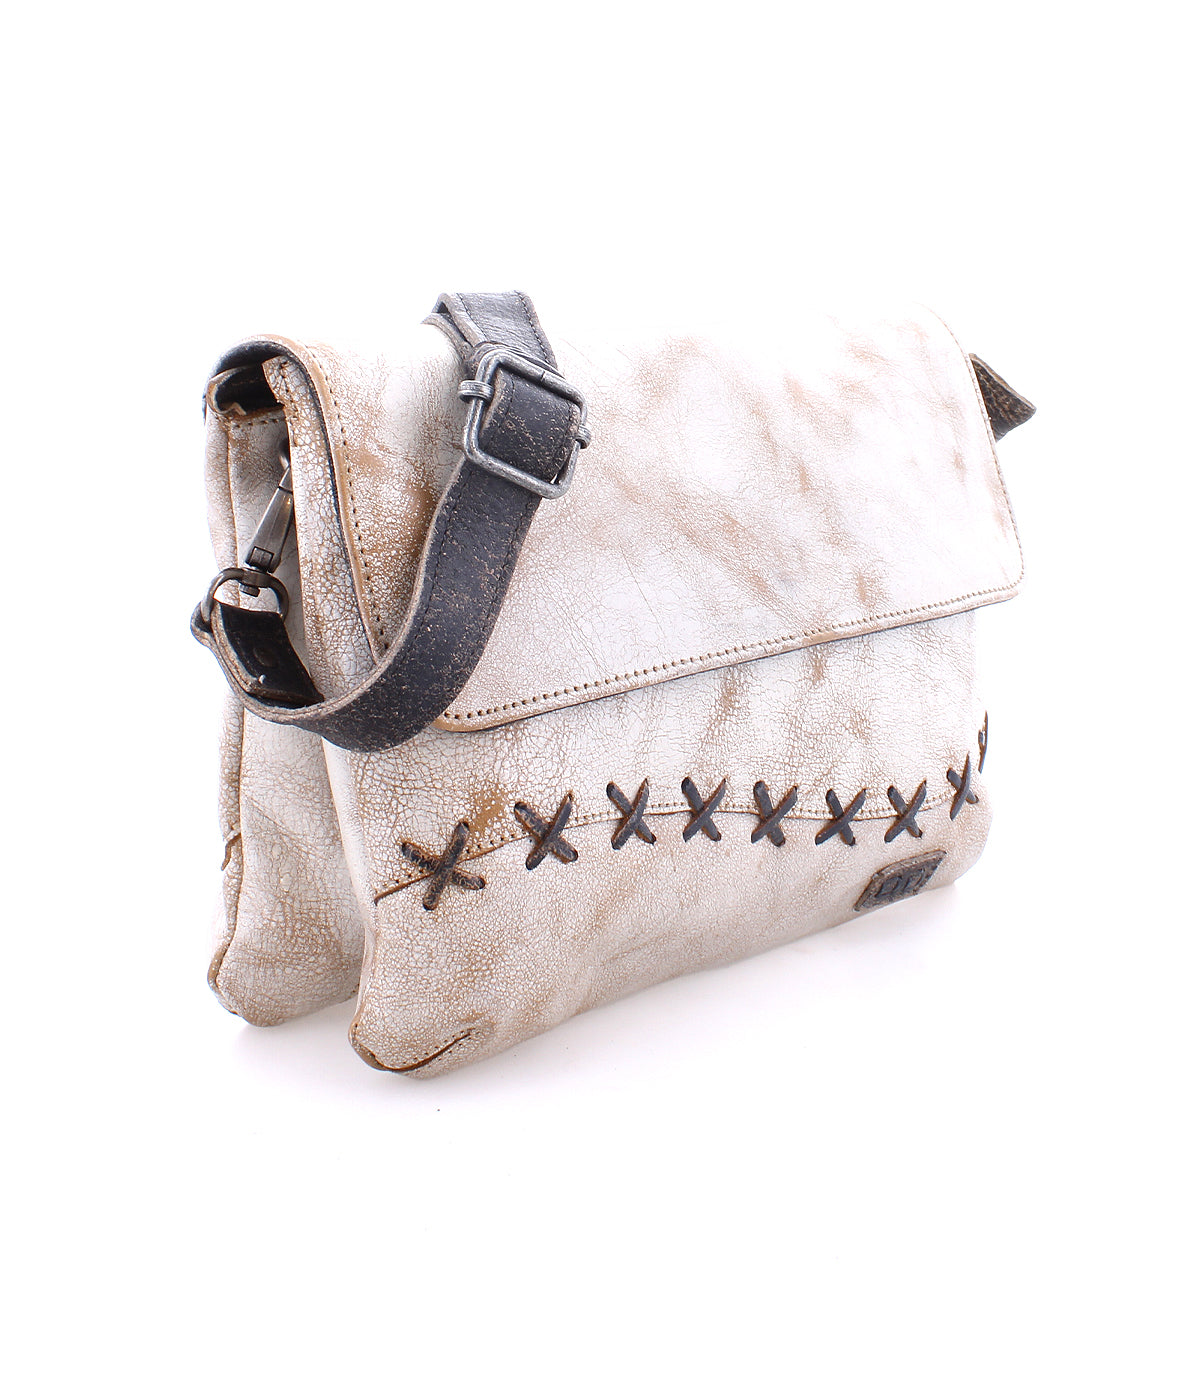 A worn leather Cleo satchel with cross-stitch detailing and a zipper top closure on a white background by Bed Stu.